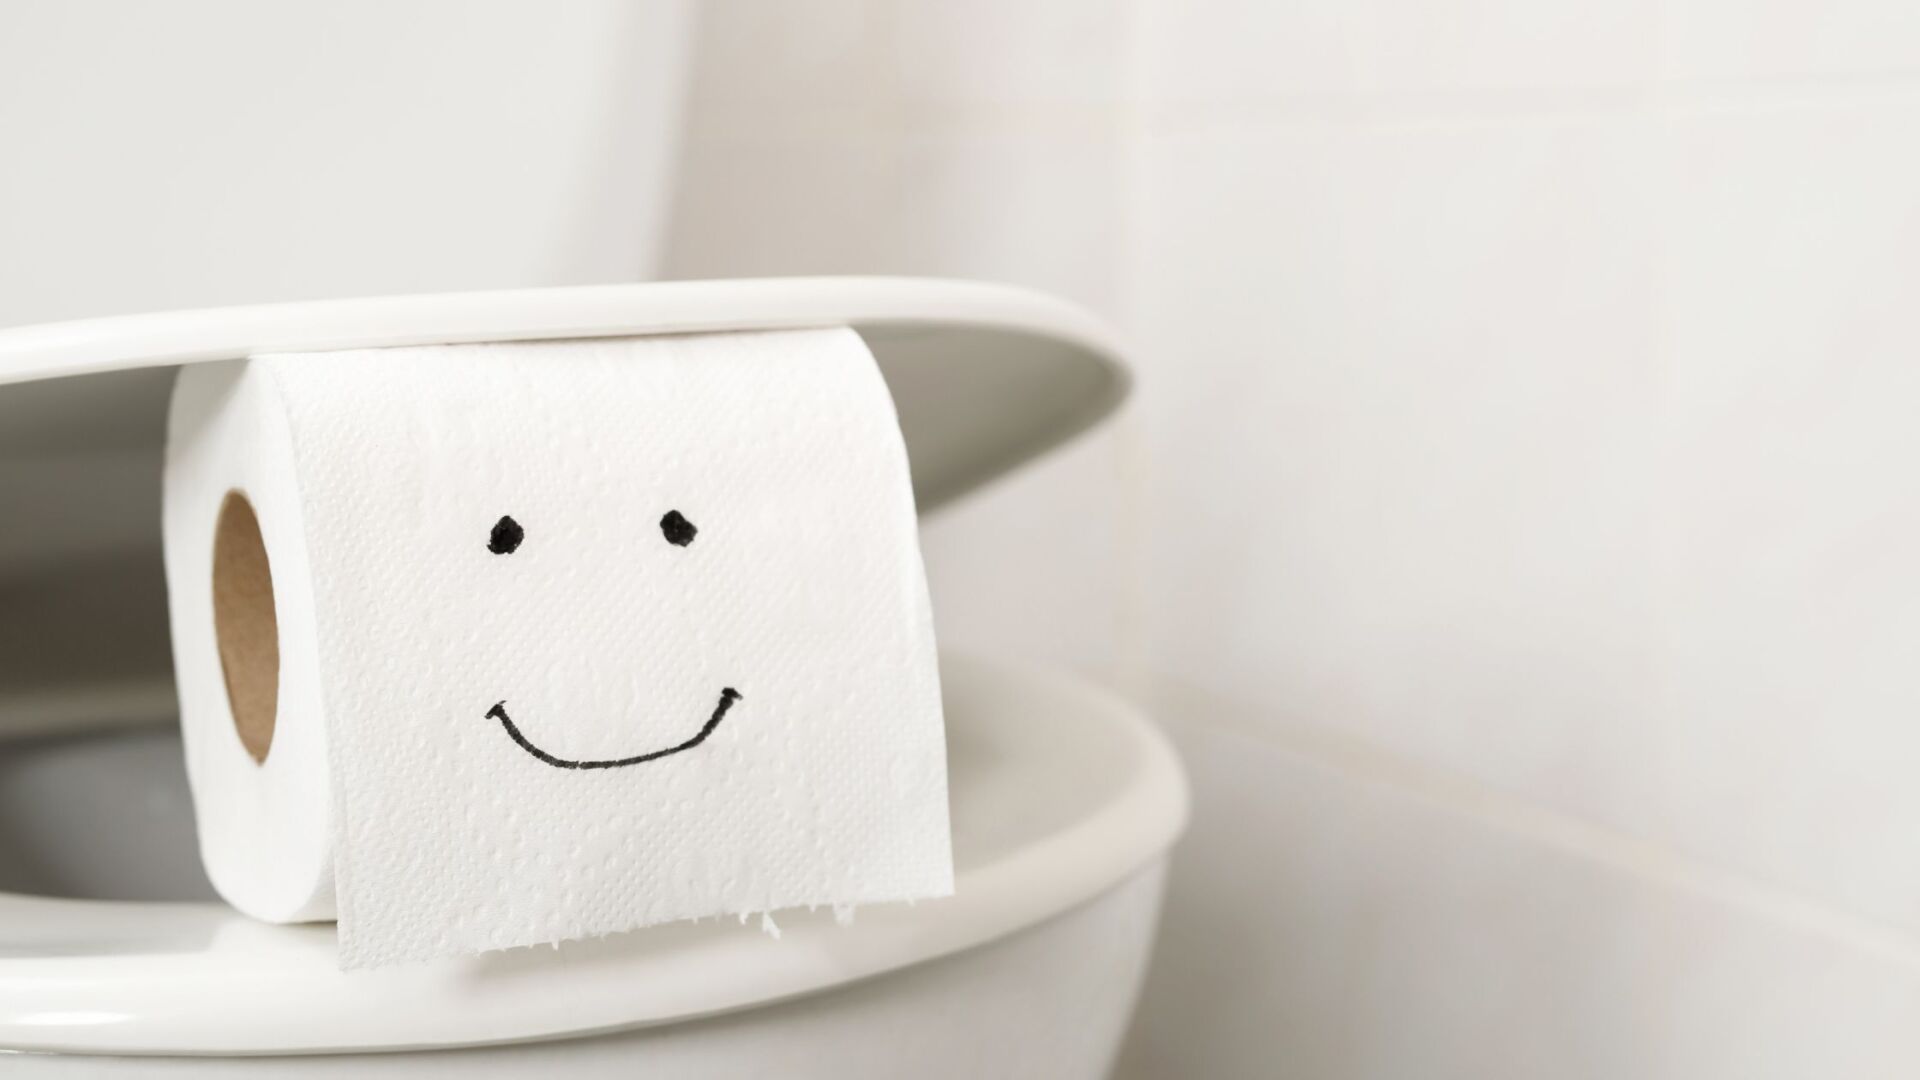 Toilet paper roll sitting on the edge of a toilet with a smile drawn on